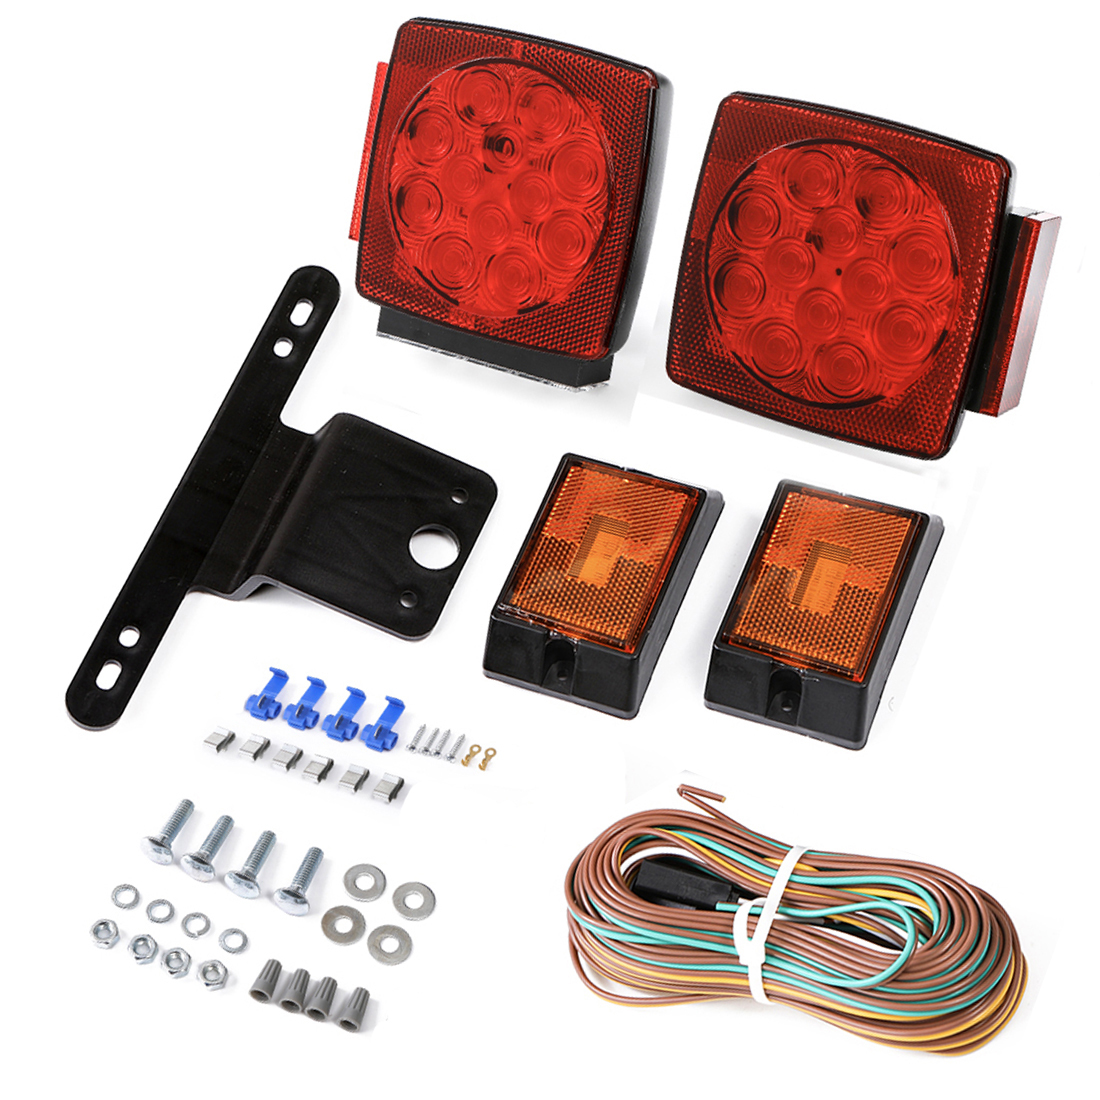 101001 12V Submersible LED Trailer Tail Light Kit for Under 80 Inch Featured Image